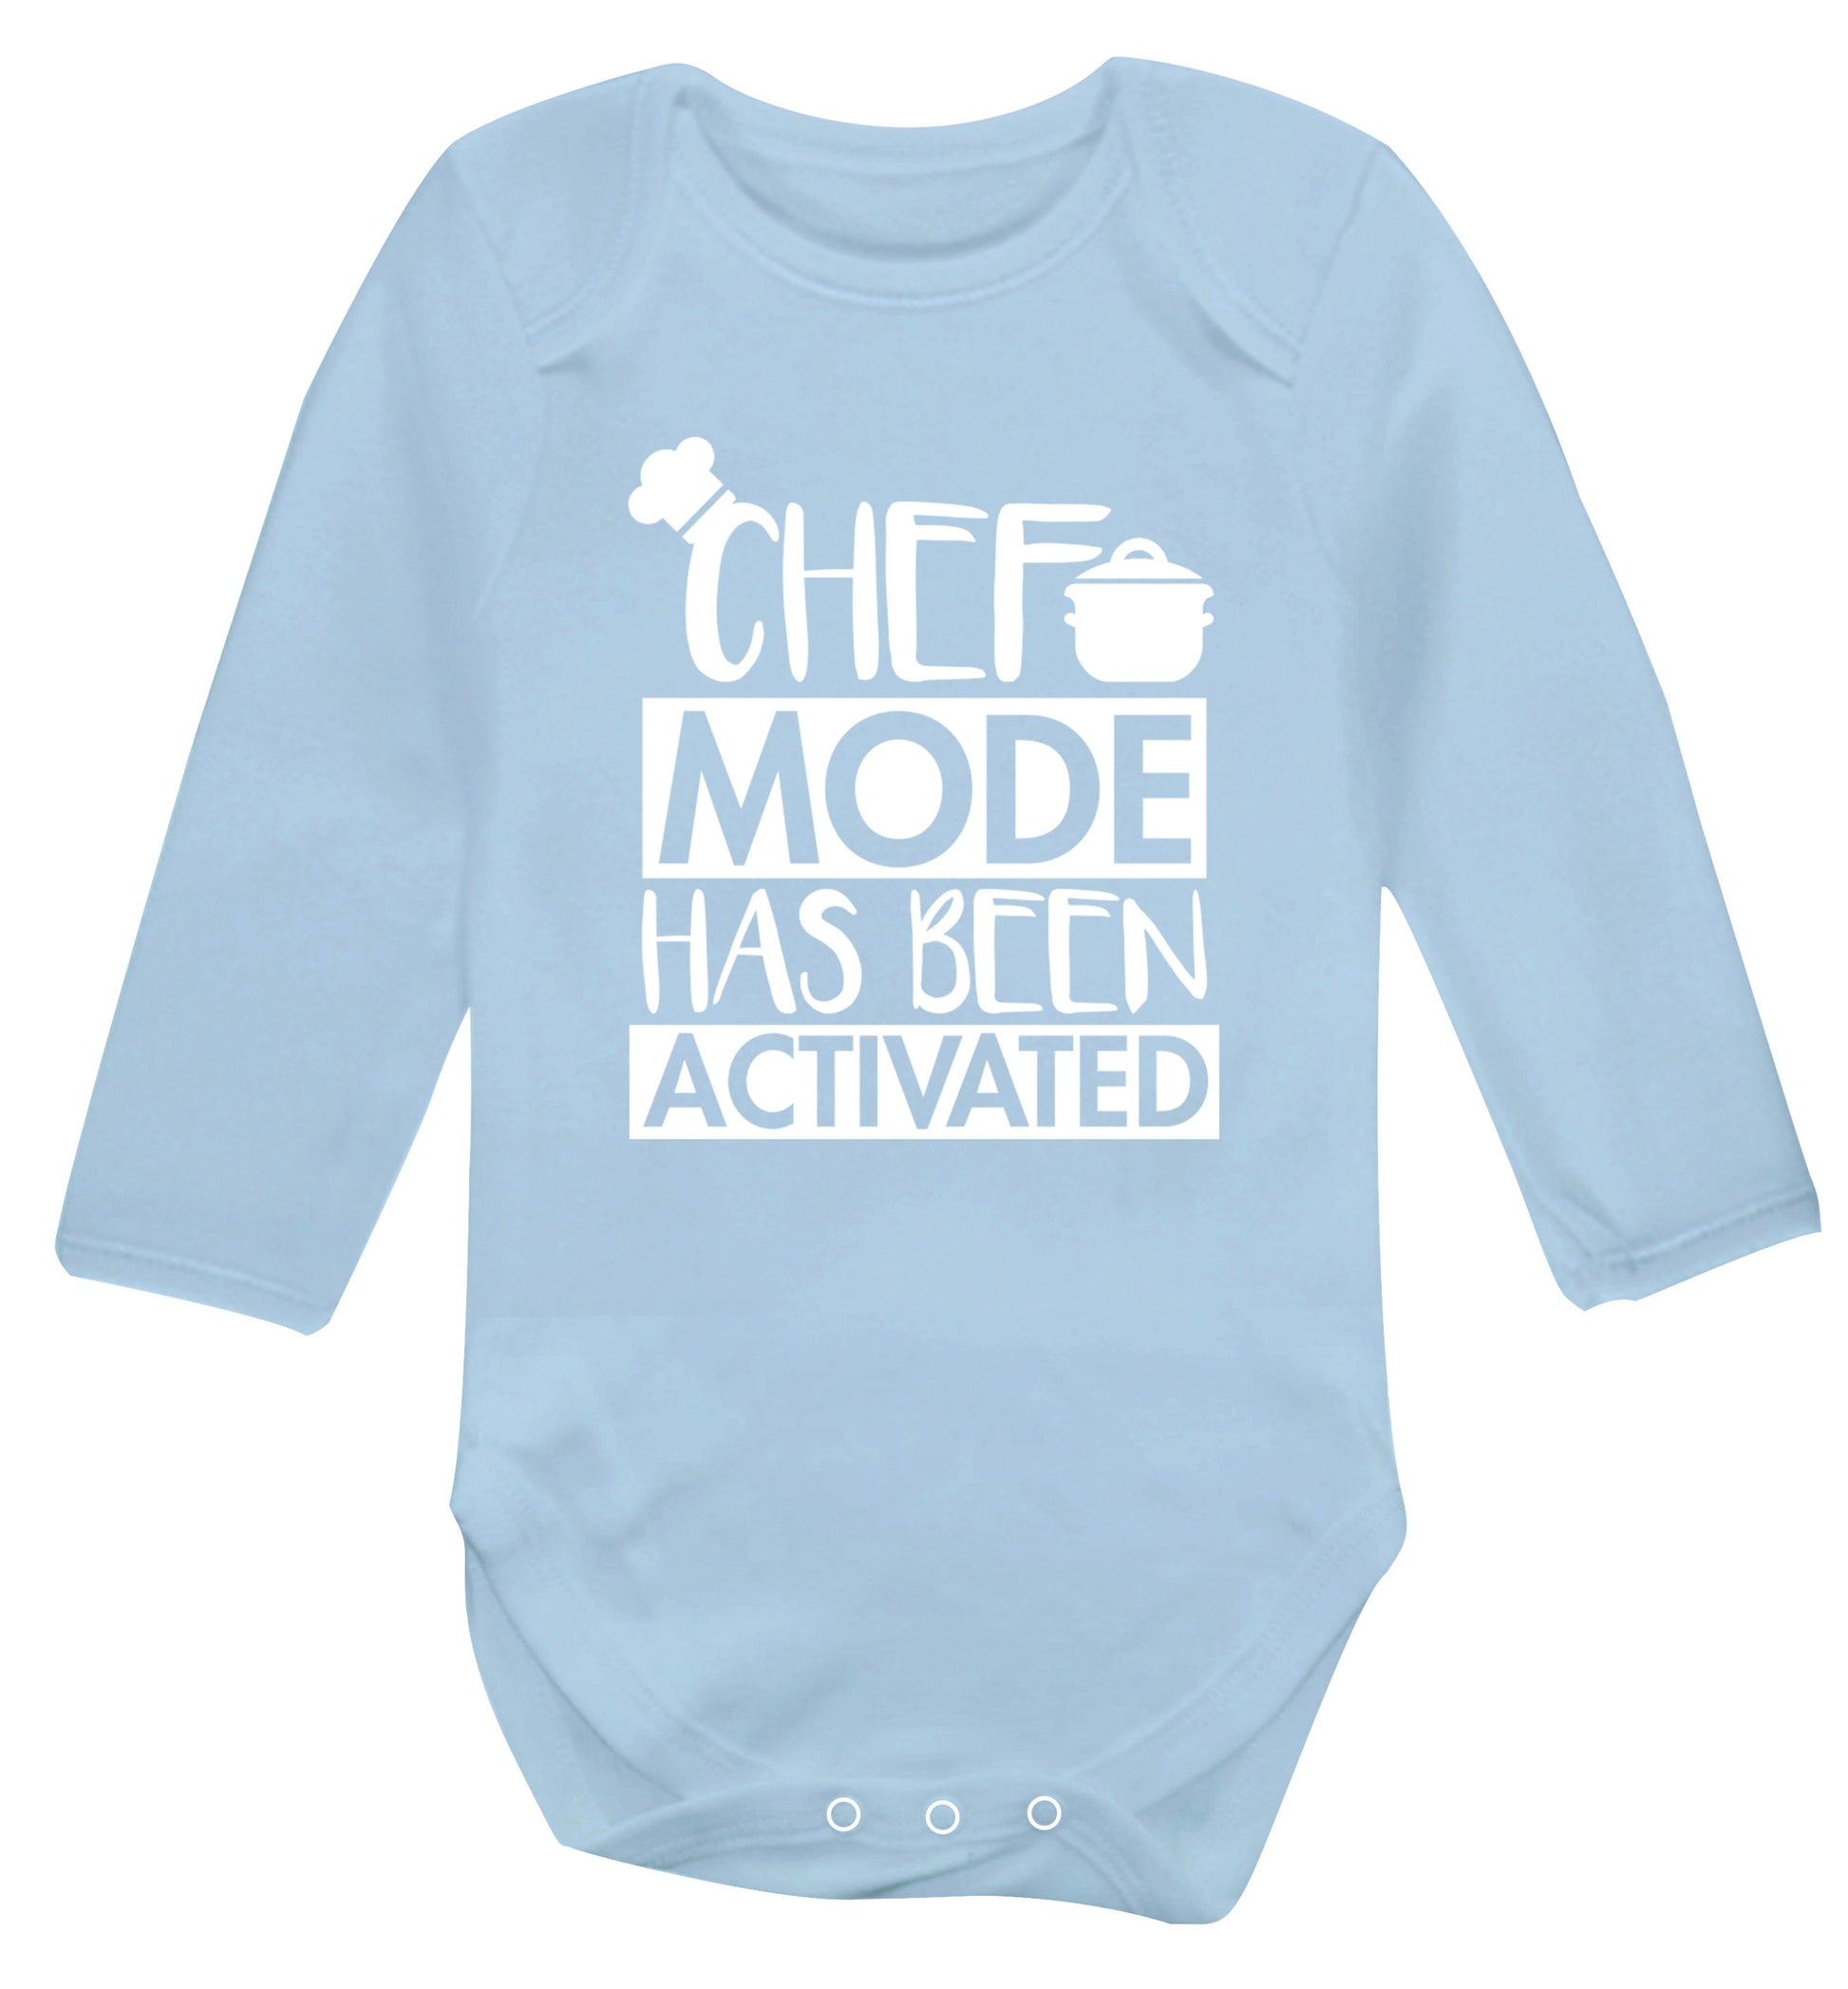 Chef mode has been activated Baby Vest long sleeved pale blue 6-12 months